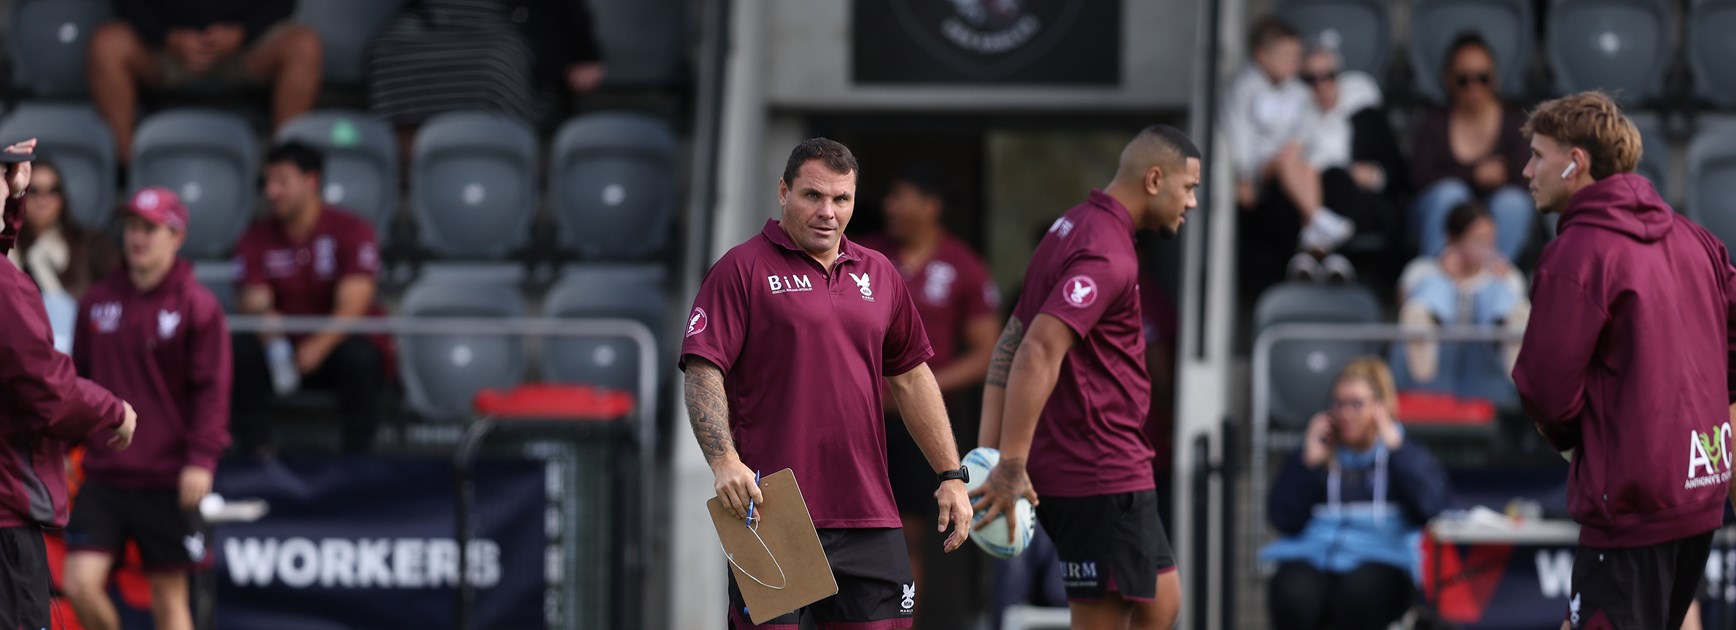 Former premiership winning Manly forward Anthony Watmough is doing a fine job in his first season of coaching